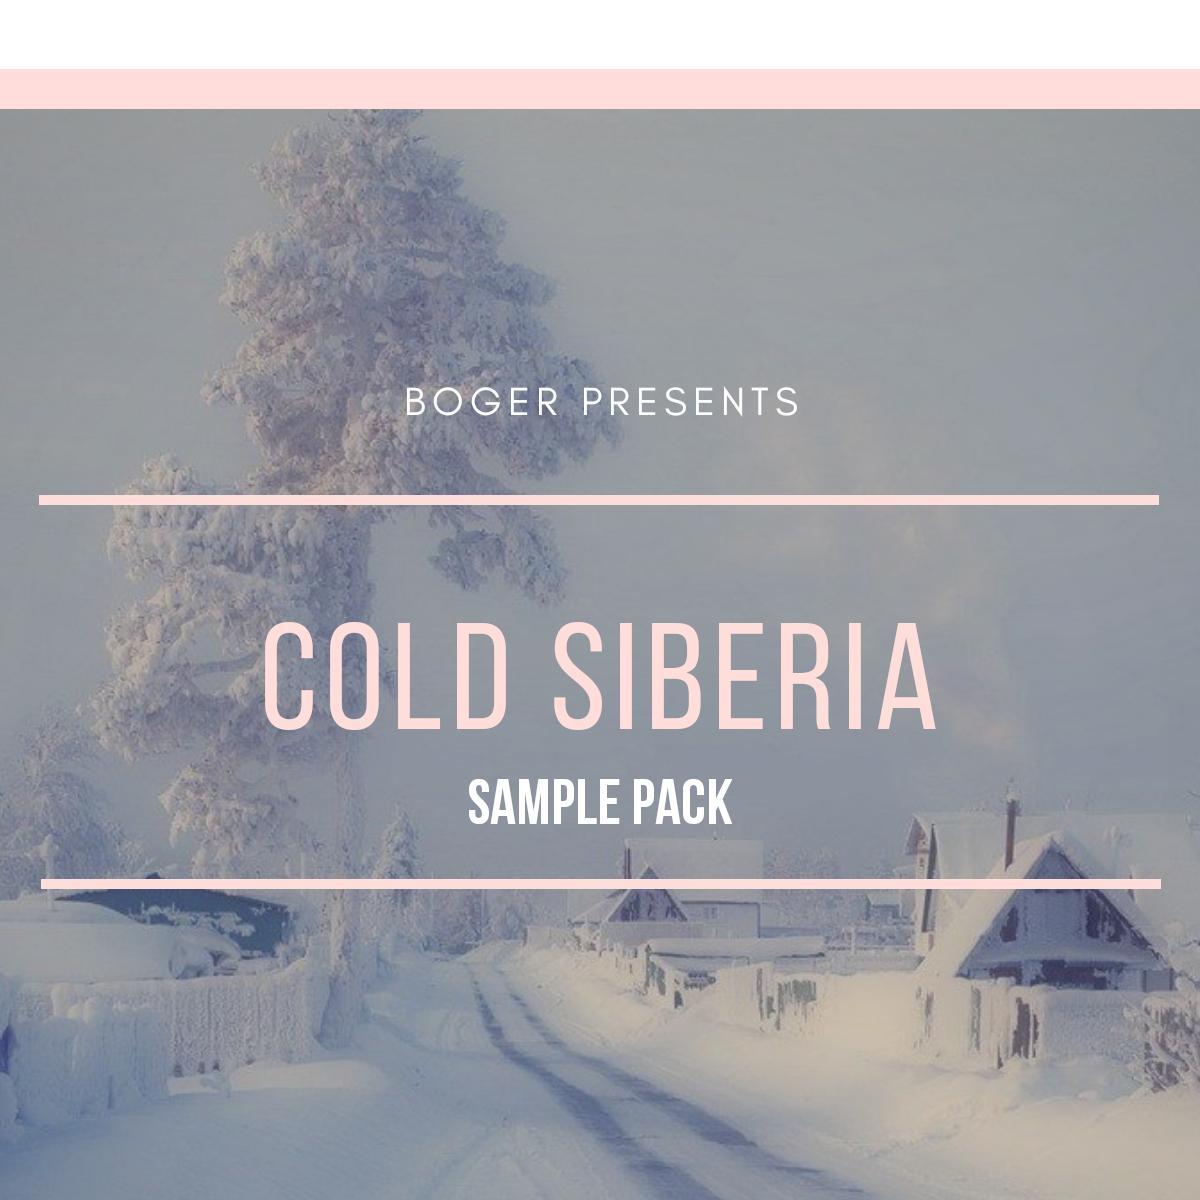 Cover of Cold Siberia Sample Pack